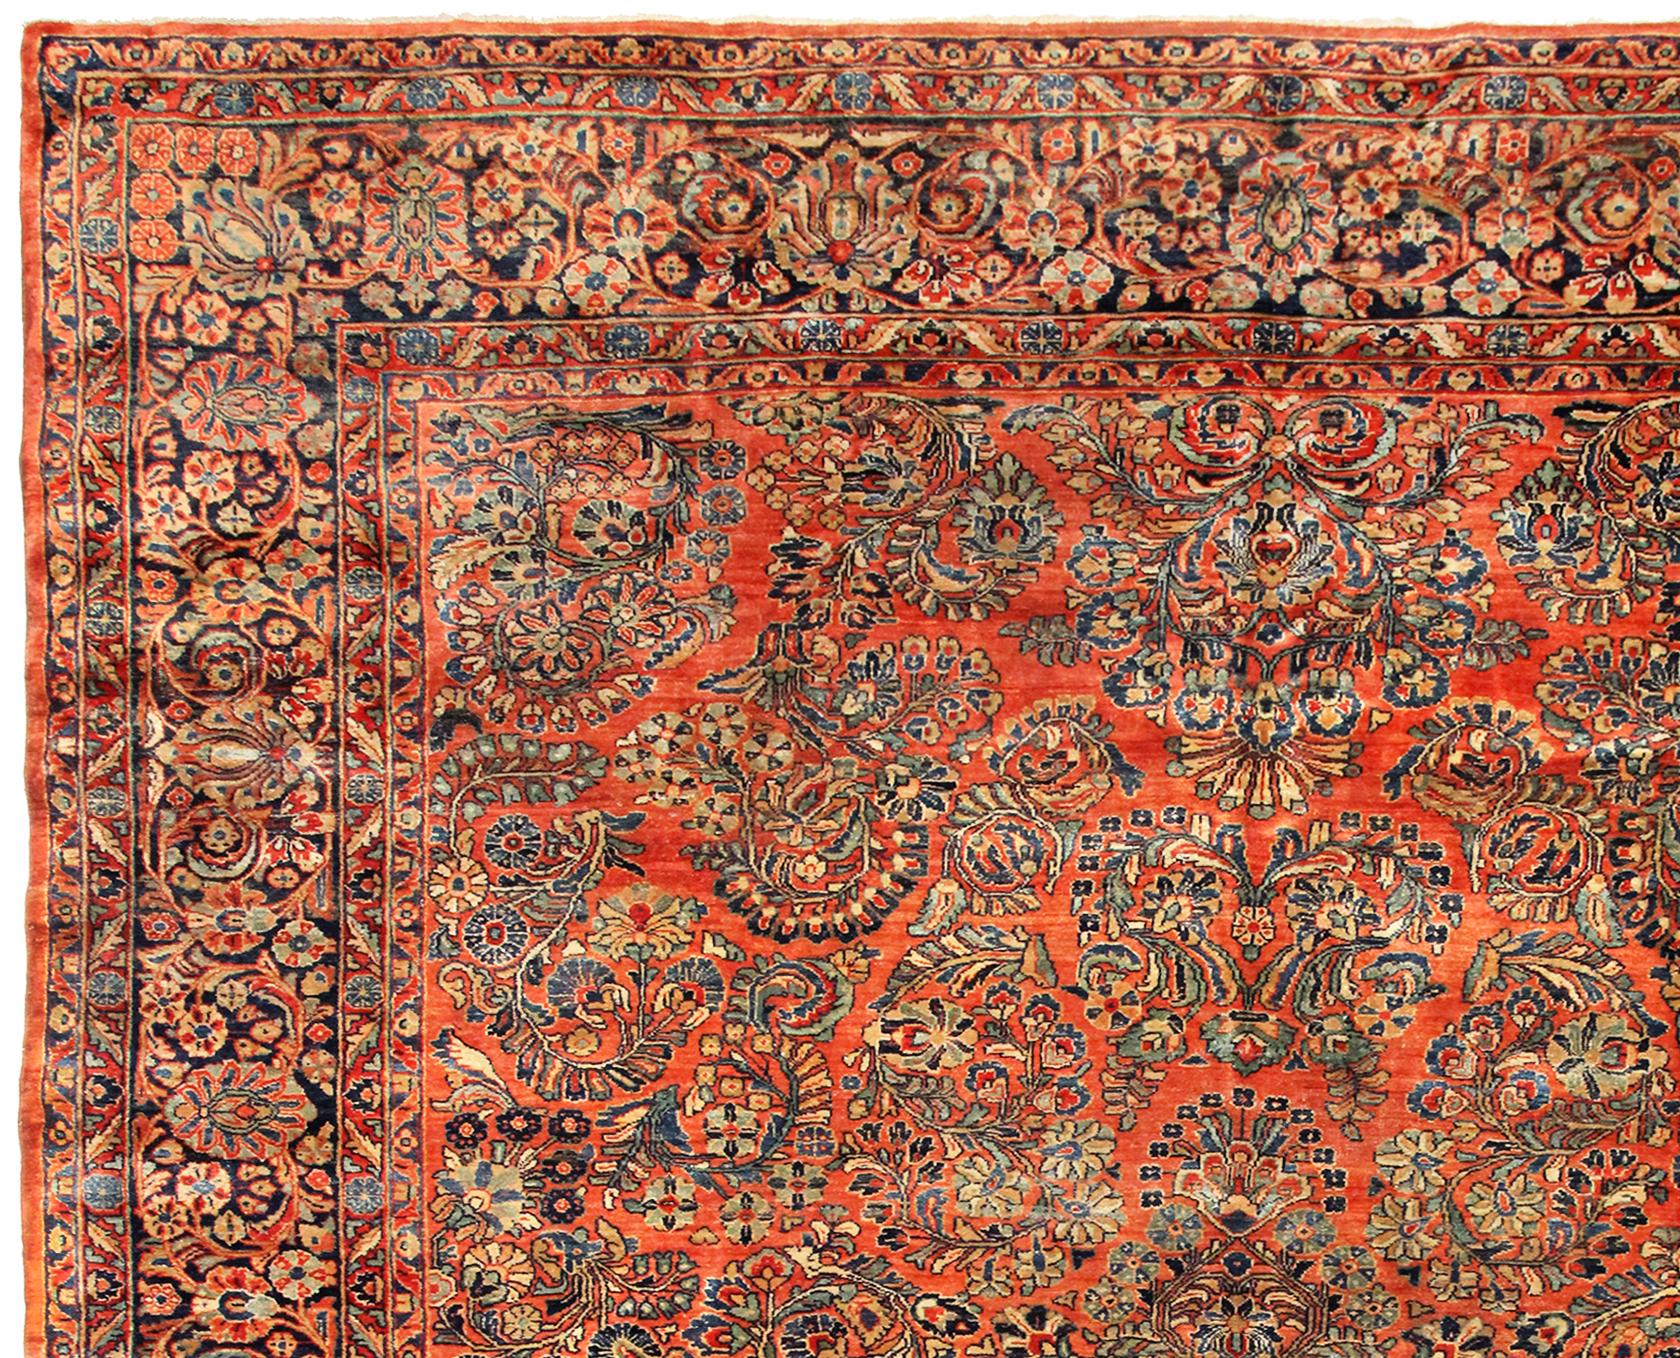 Wool Antique Persian Sarouk Oriental Rug, in Room Size, with Coral Tones, circa 1920 For Sale